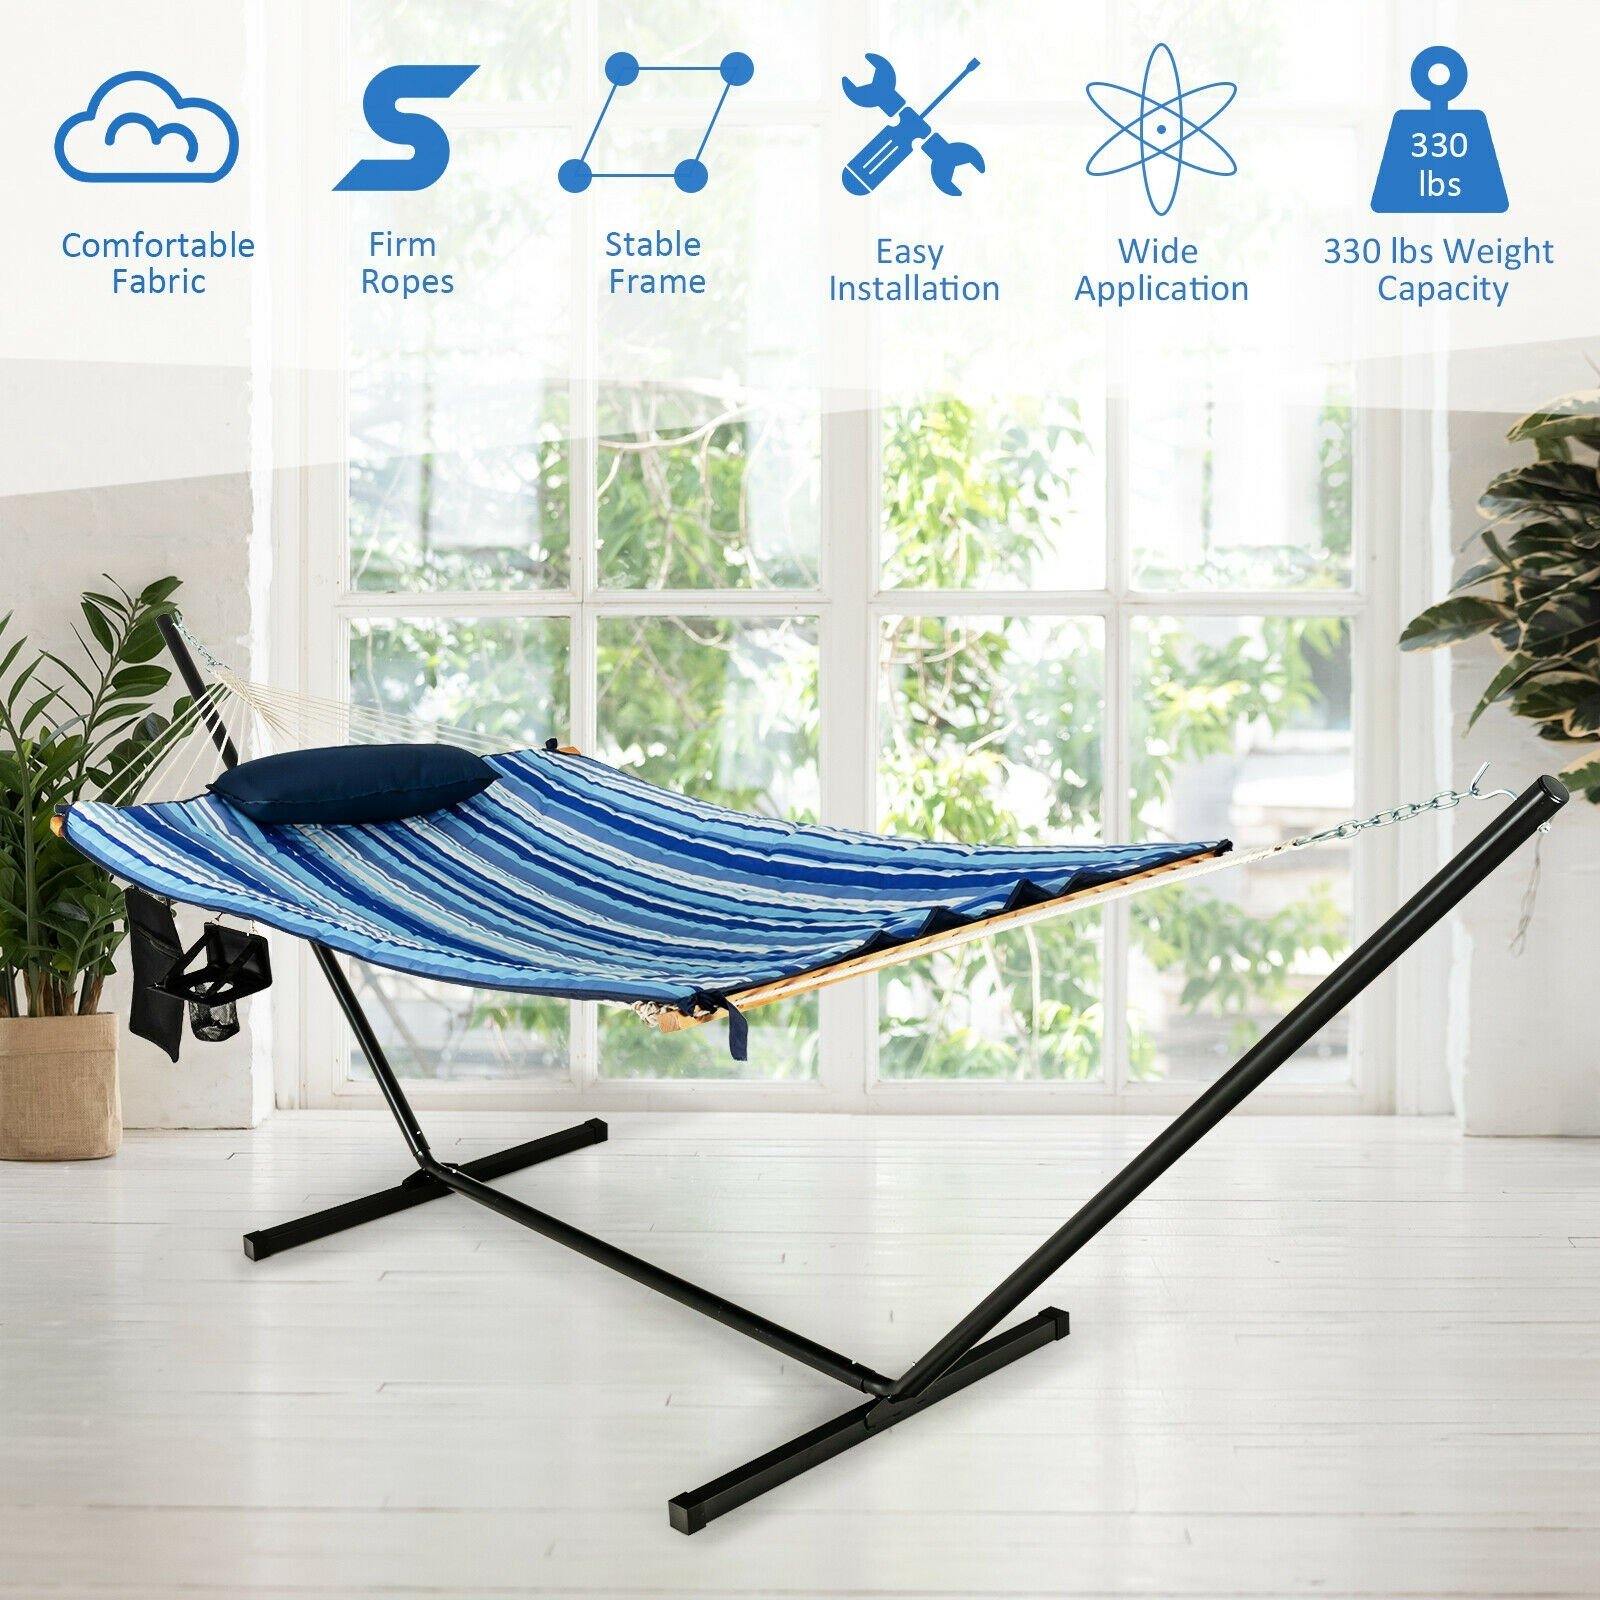 12Ft Hammock with Stand, 2 Person Heavy-Duty Steel Hammock Stand, 450 lbs Capacity (Blue and Beige Striped) - Giantexus